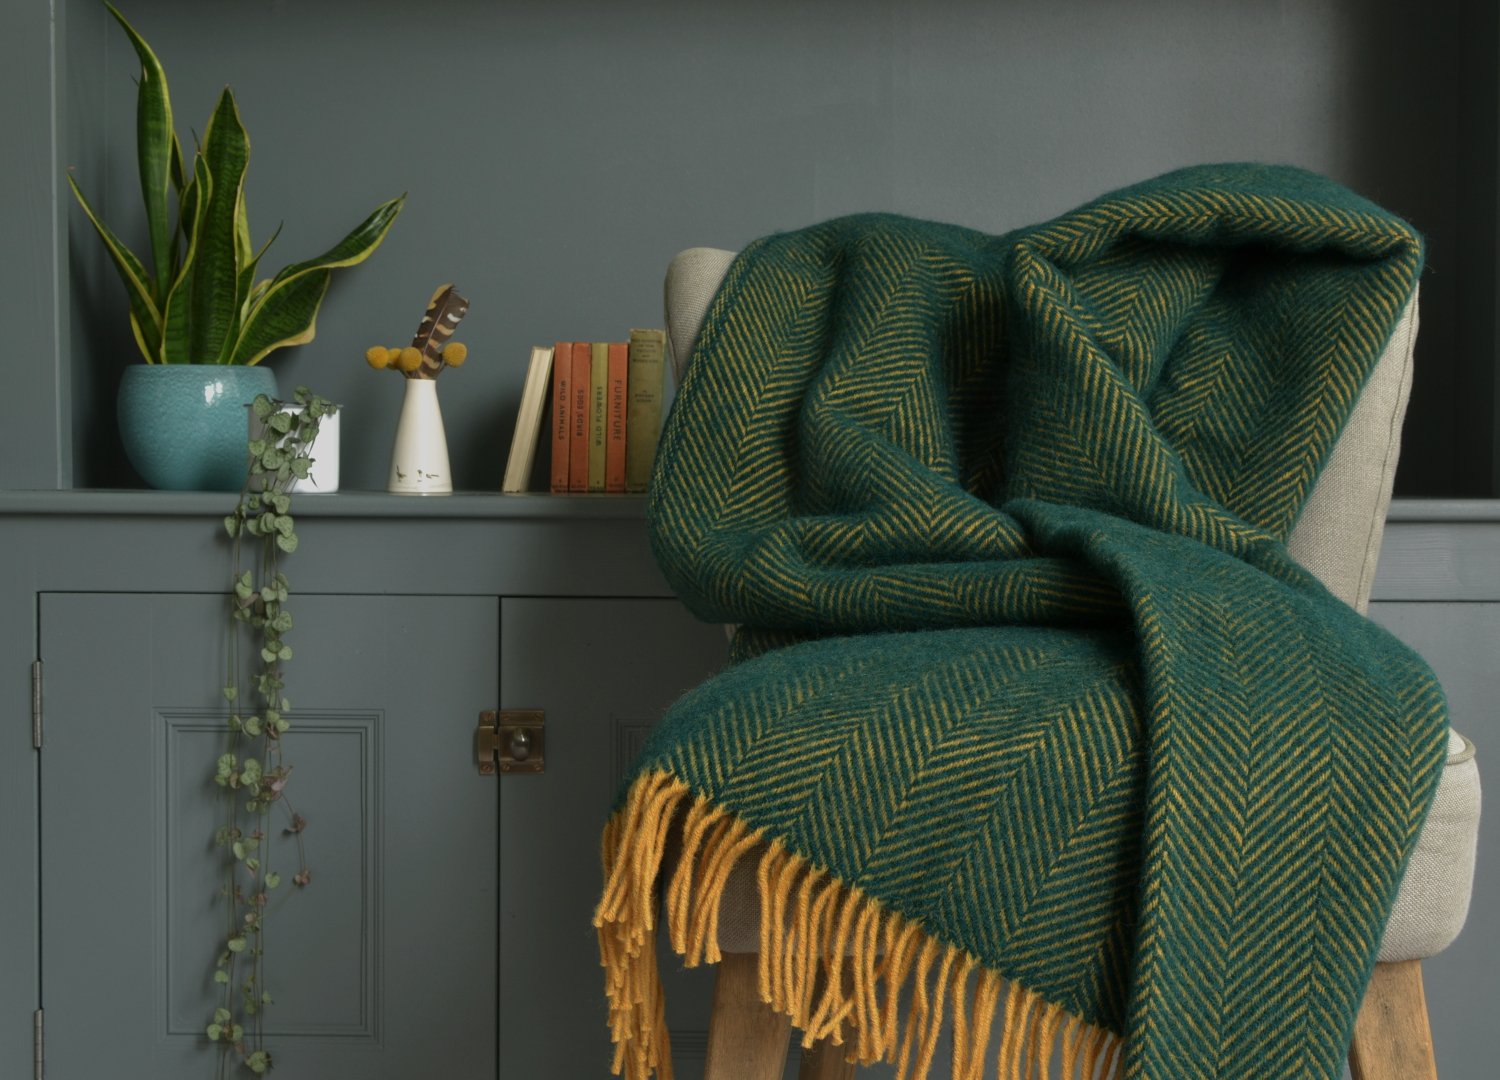 The British Blanket Company On Art, Emerald Green Throws For Sofas